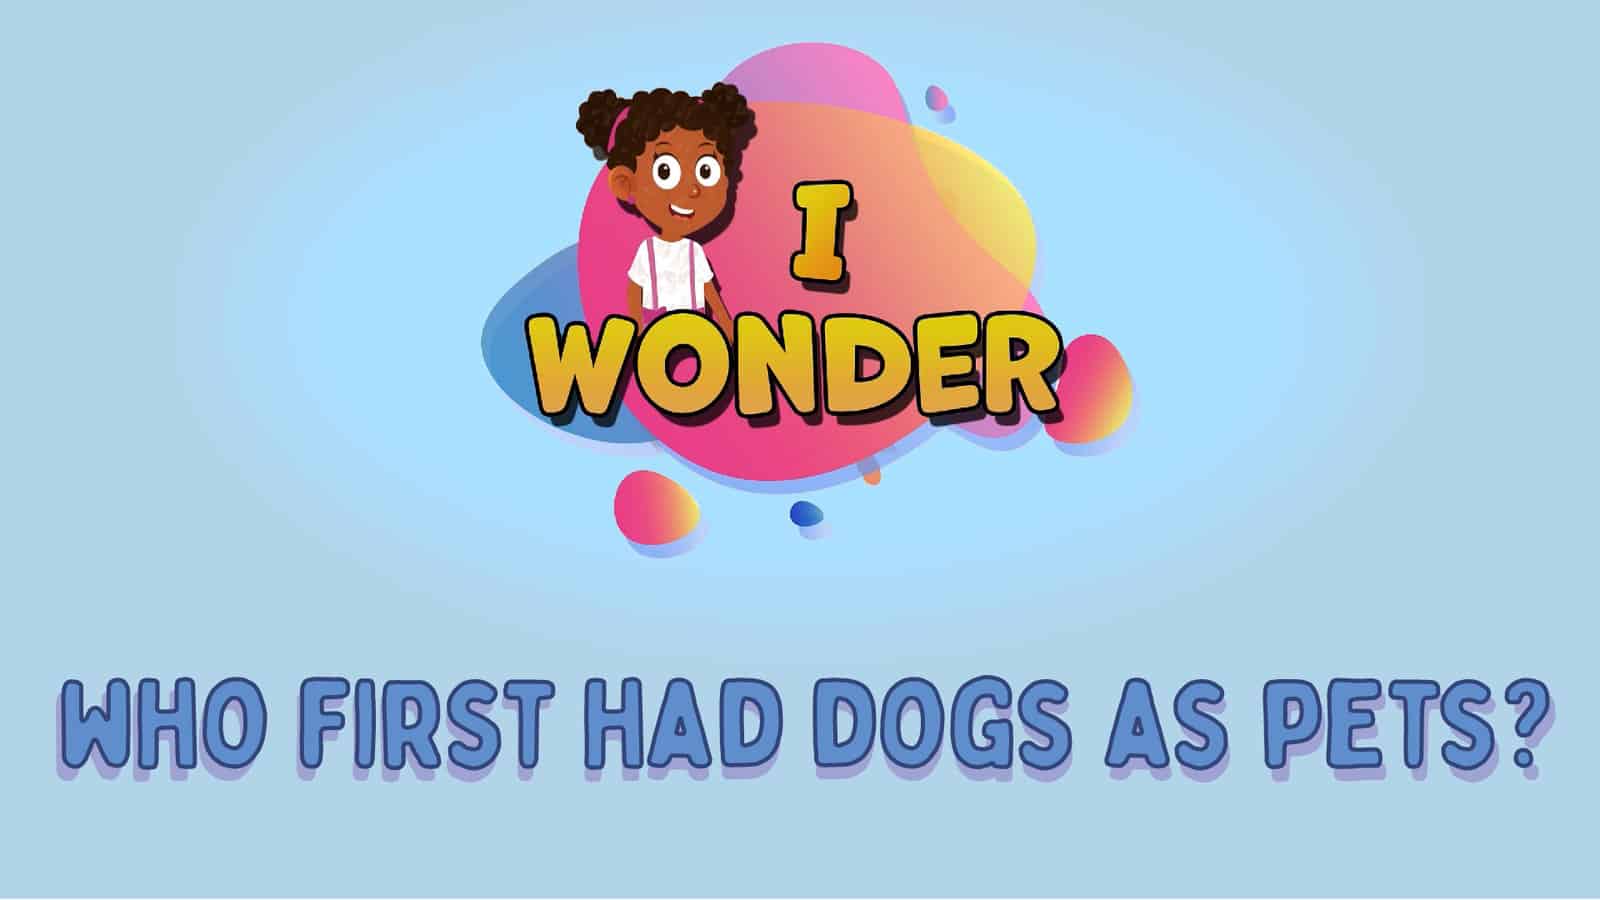 Who First Had Dogs As Pets?